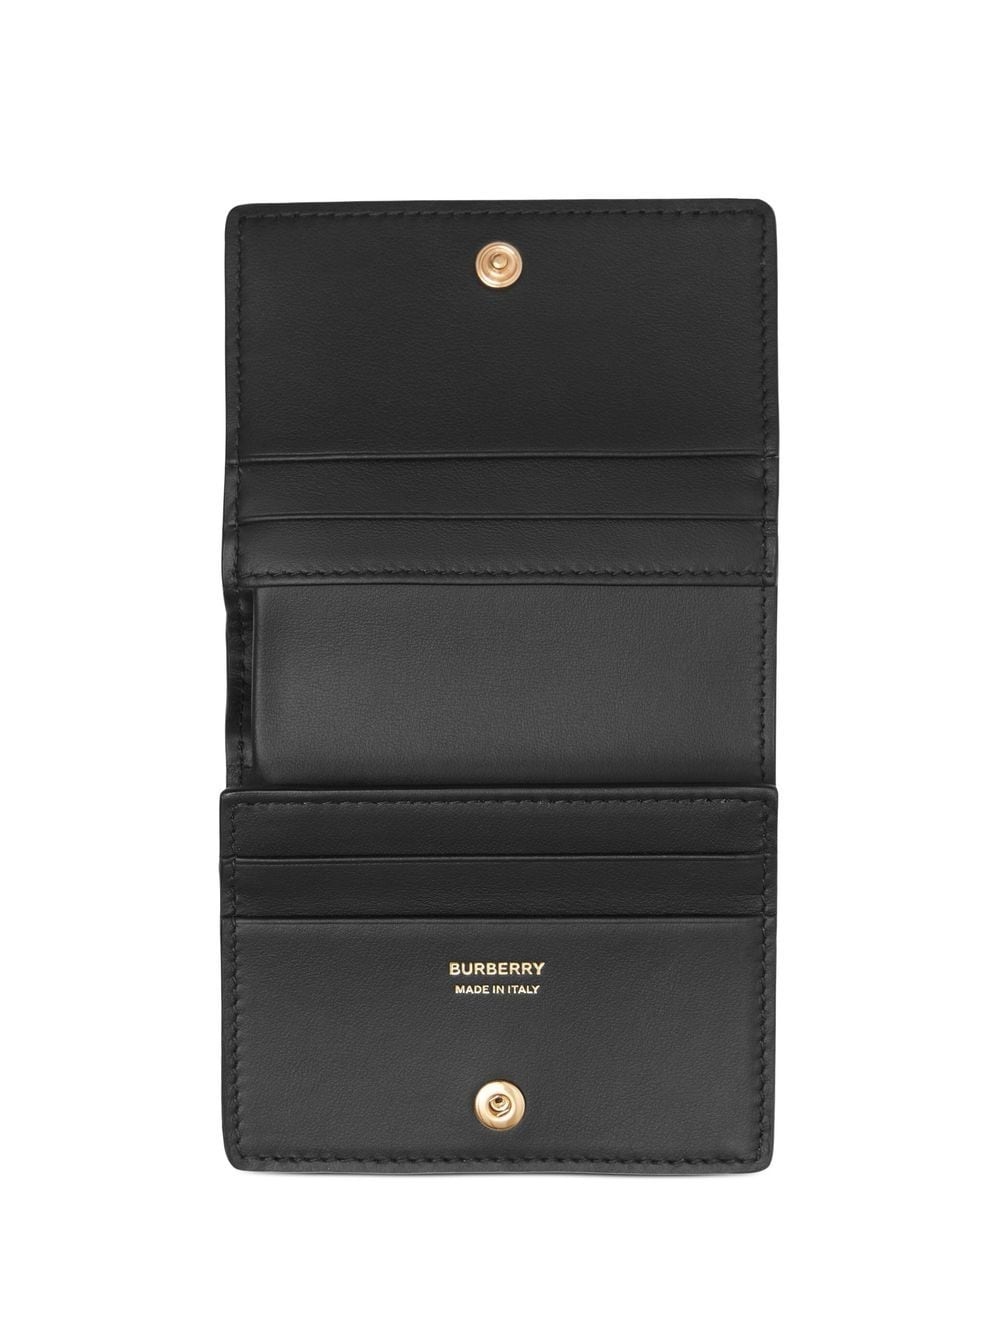 Burberry Grainy Leather Bifold Wallet - Blue | ModeSens